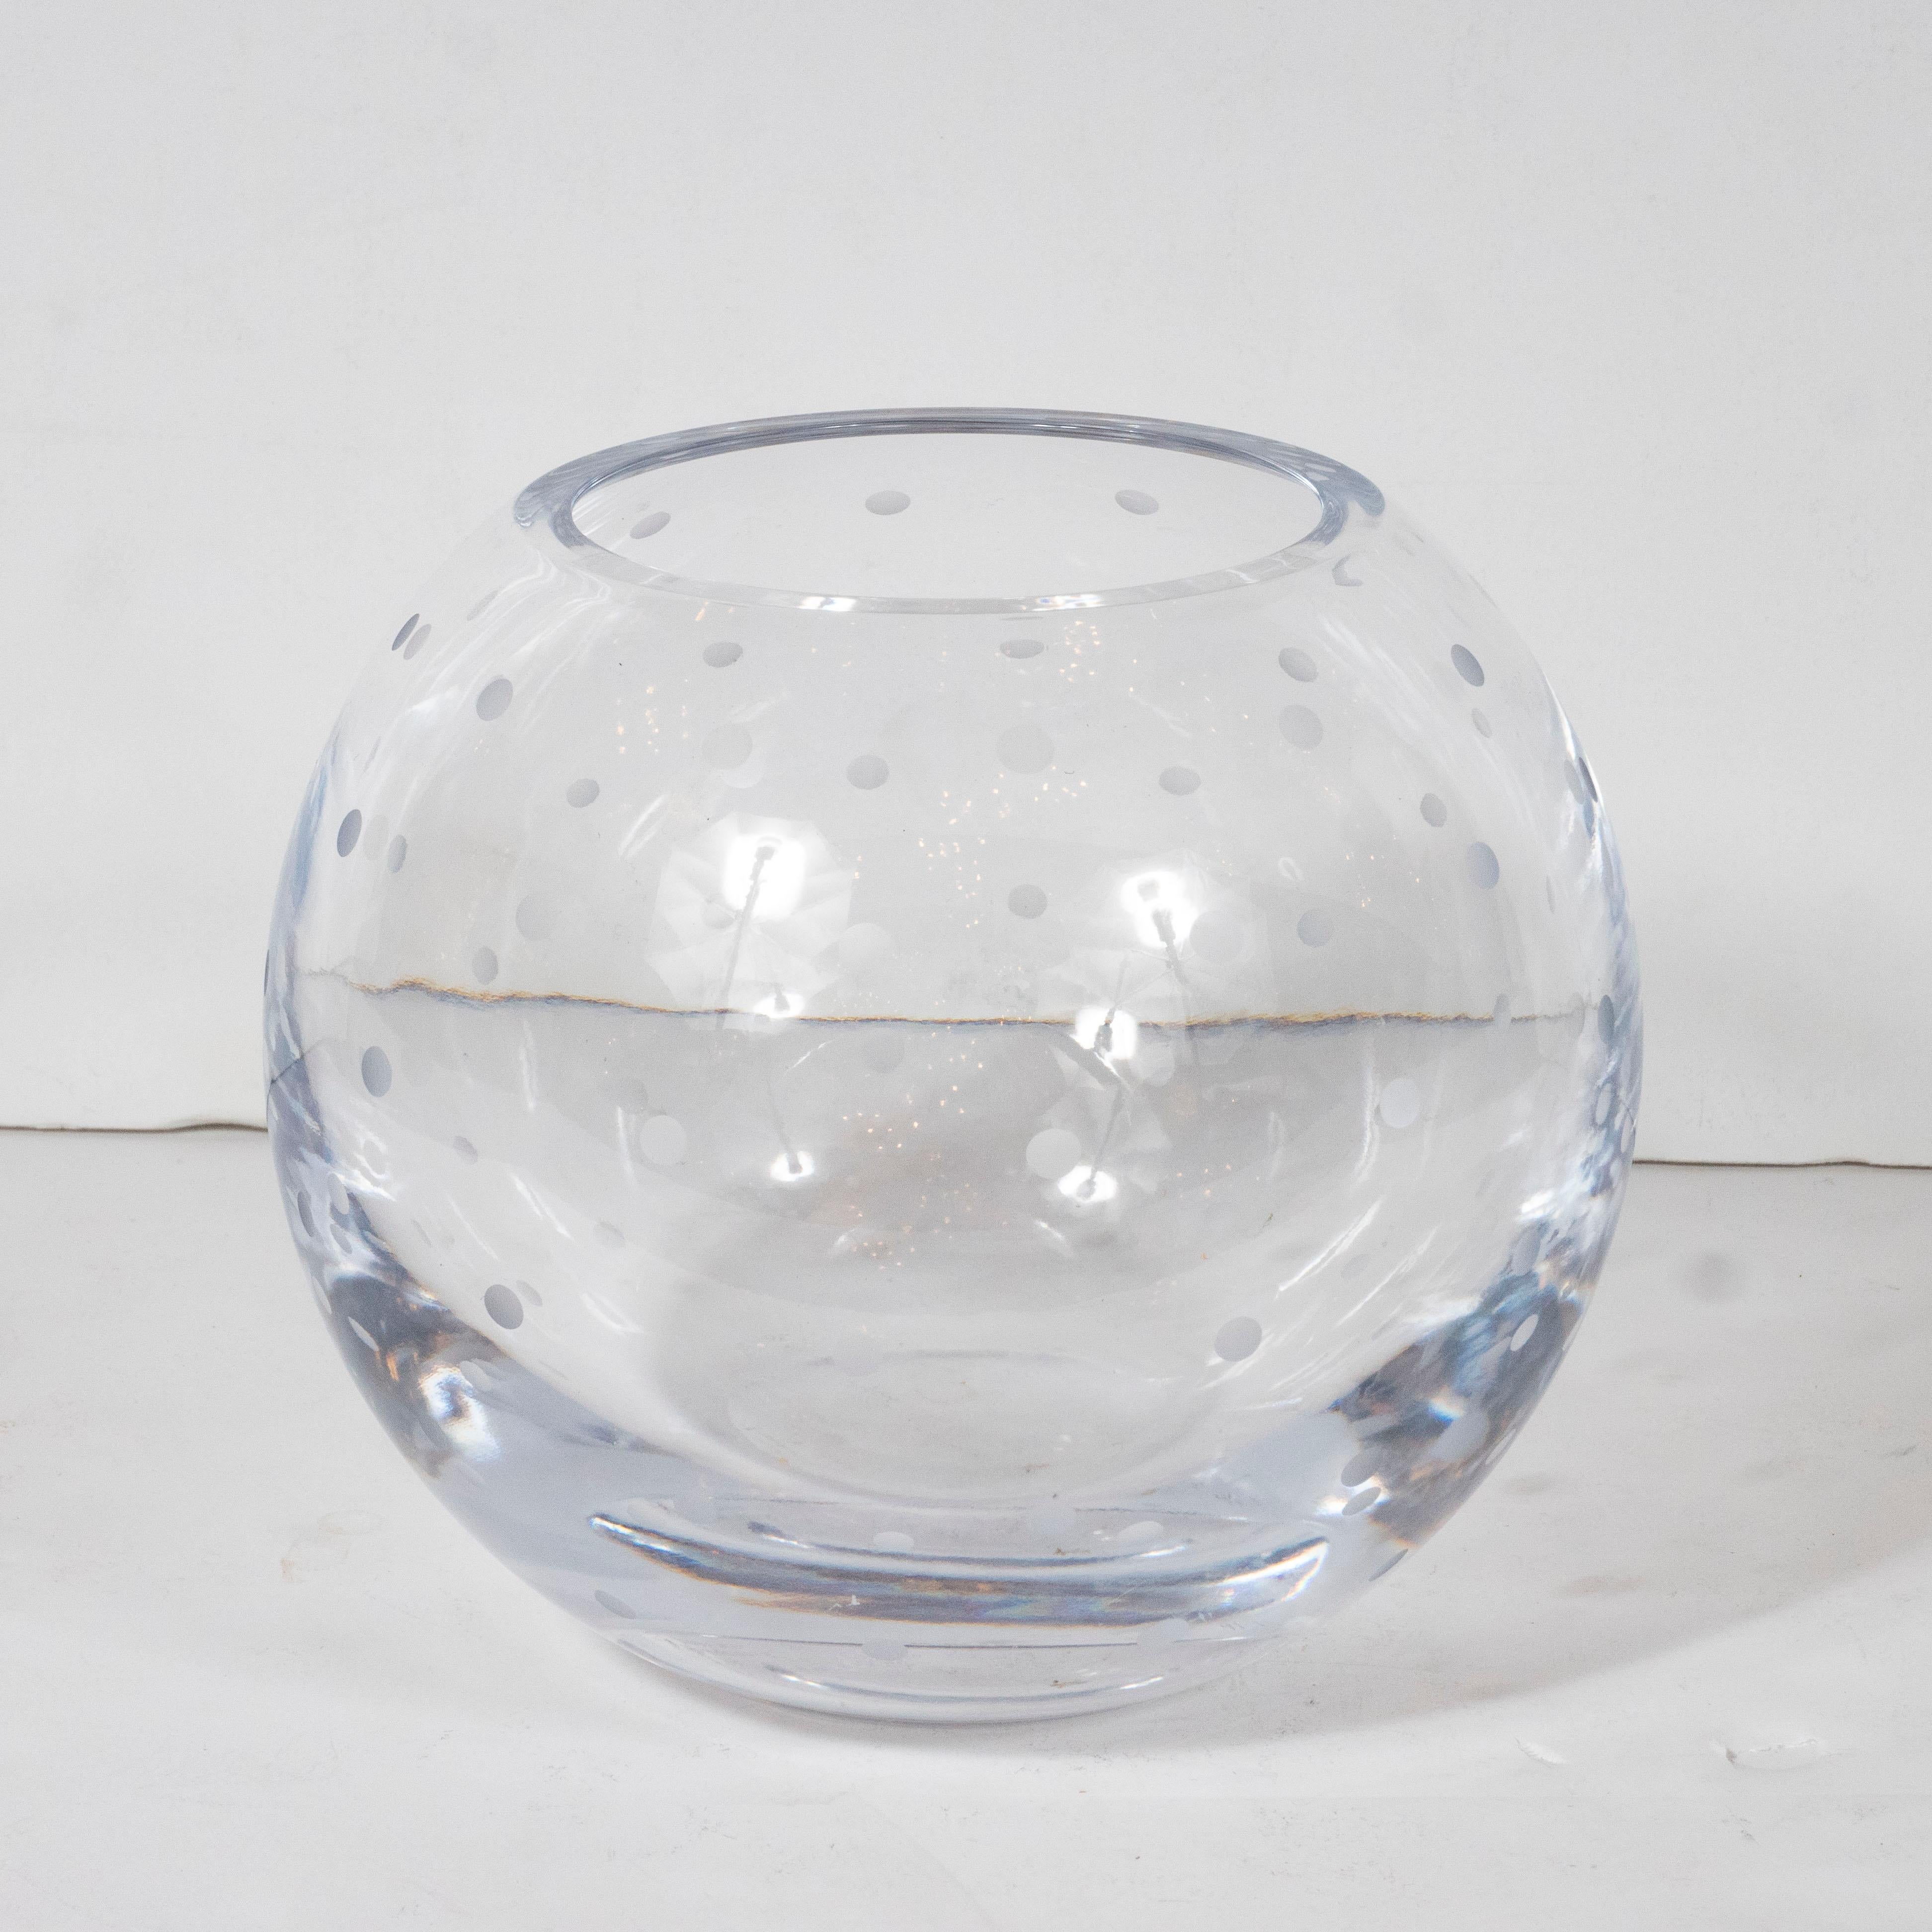 This modernist vase was realized in the United States during the 20th century. It offers a spherical form with evenly spaced frosted dots etched throughout the translucent body of the piece. With its clean modernist lines and monochromatic palate,